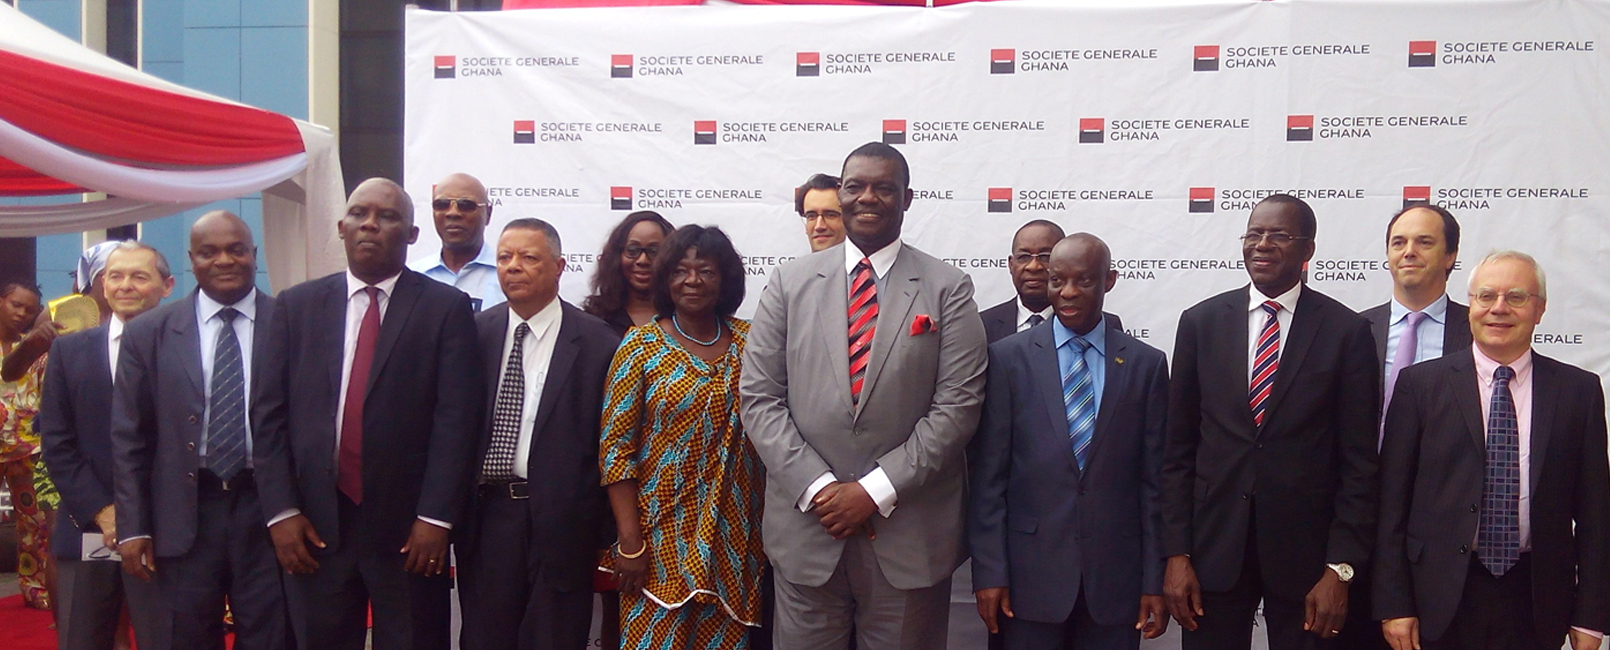 The Ghana Association of Bankers